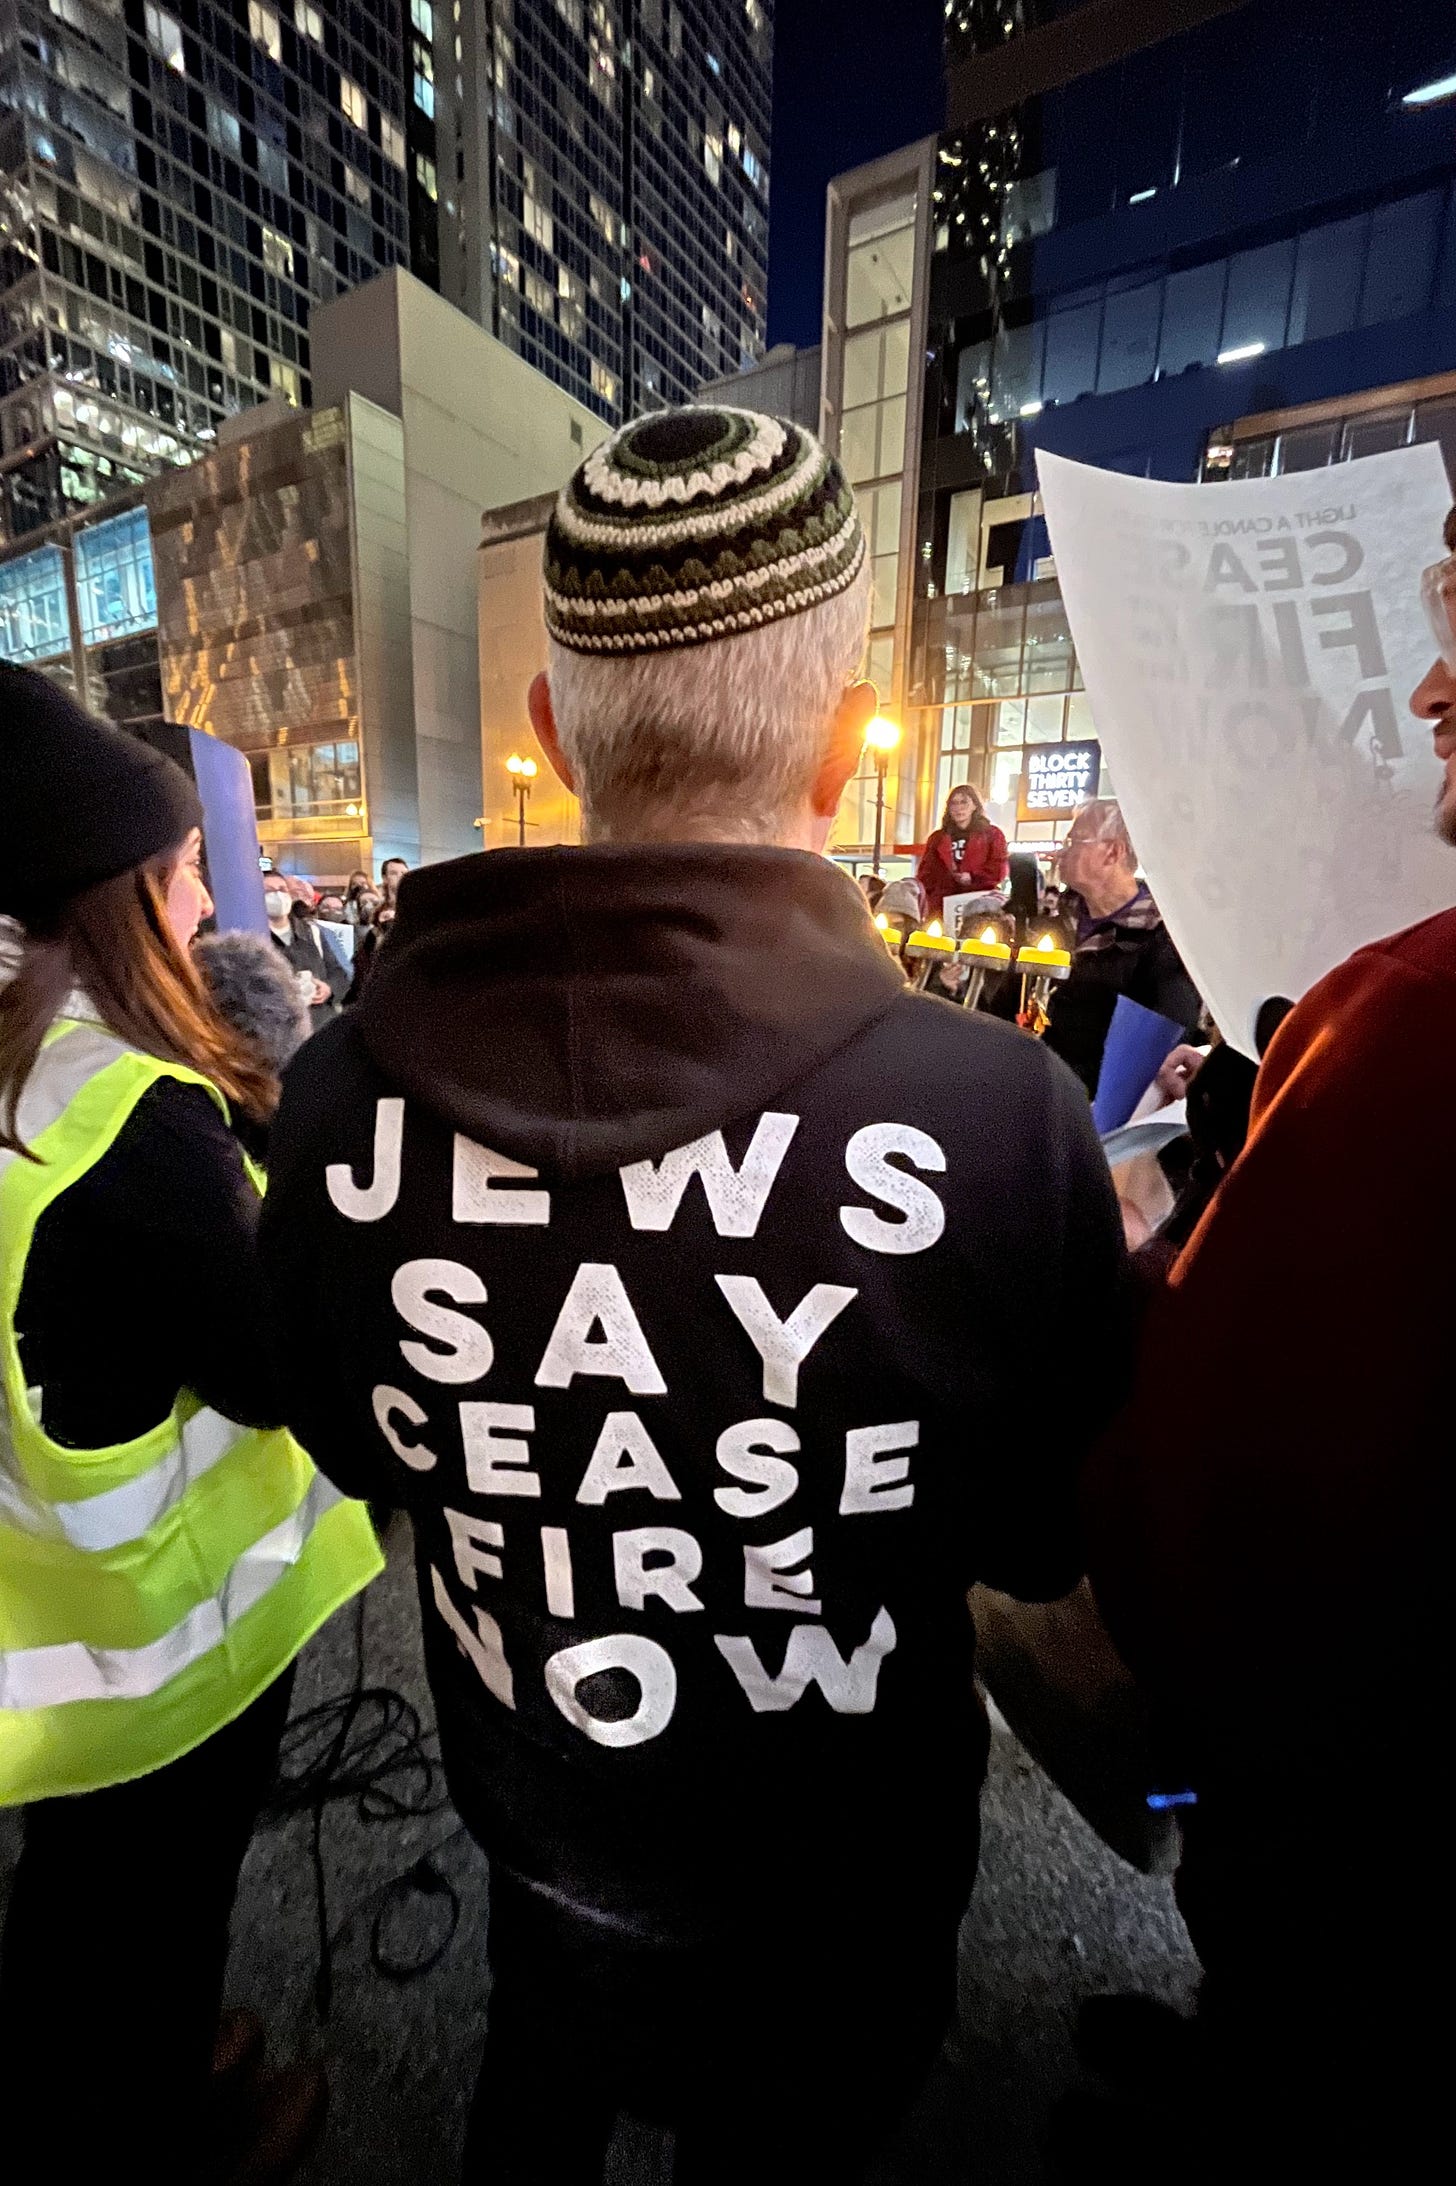 A rabbi facing away from the camera holds a menorah. The back of his sweatshirt says "Jews say ceasefire now"